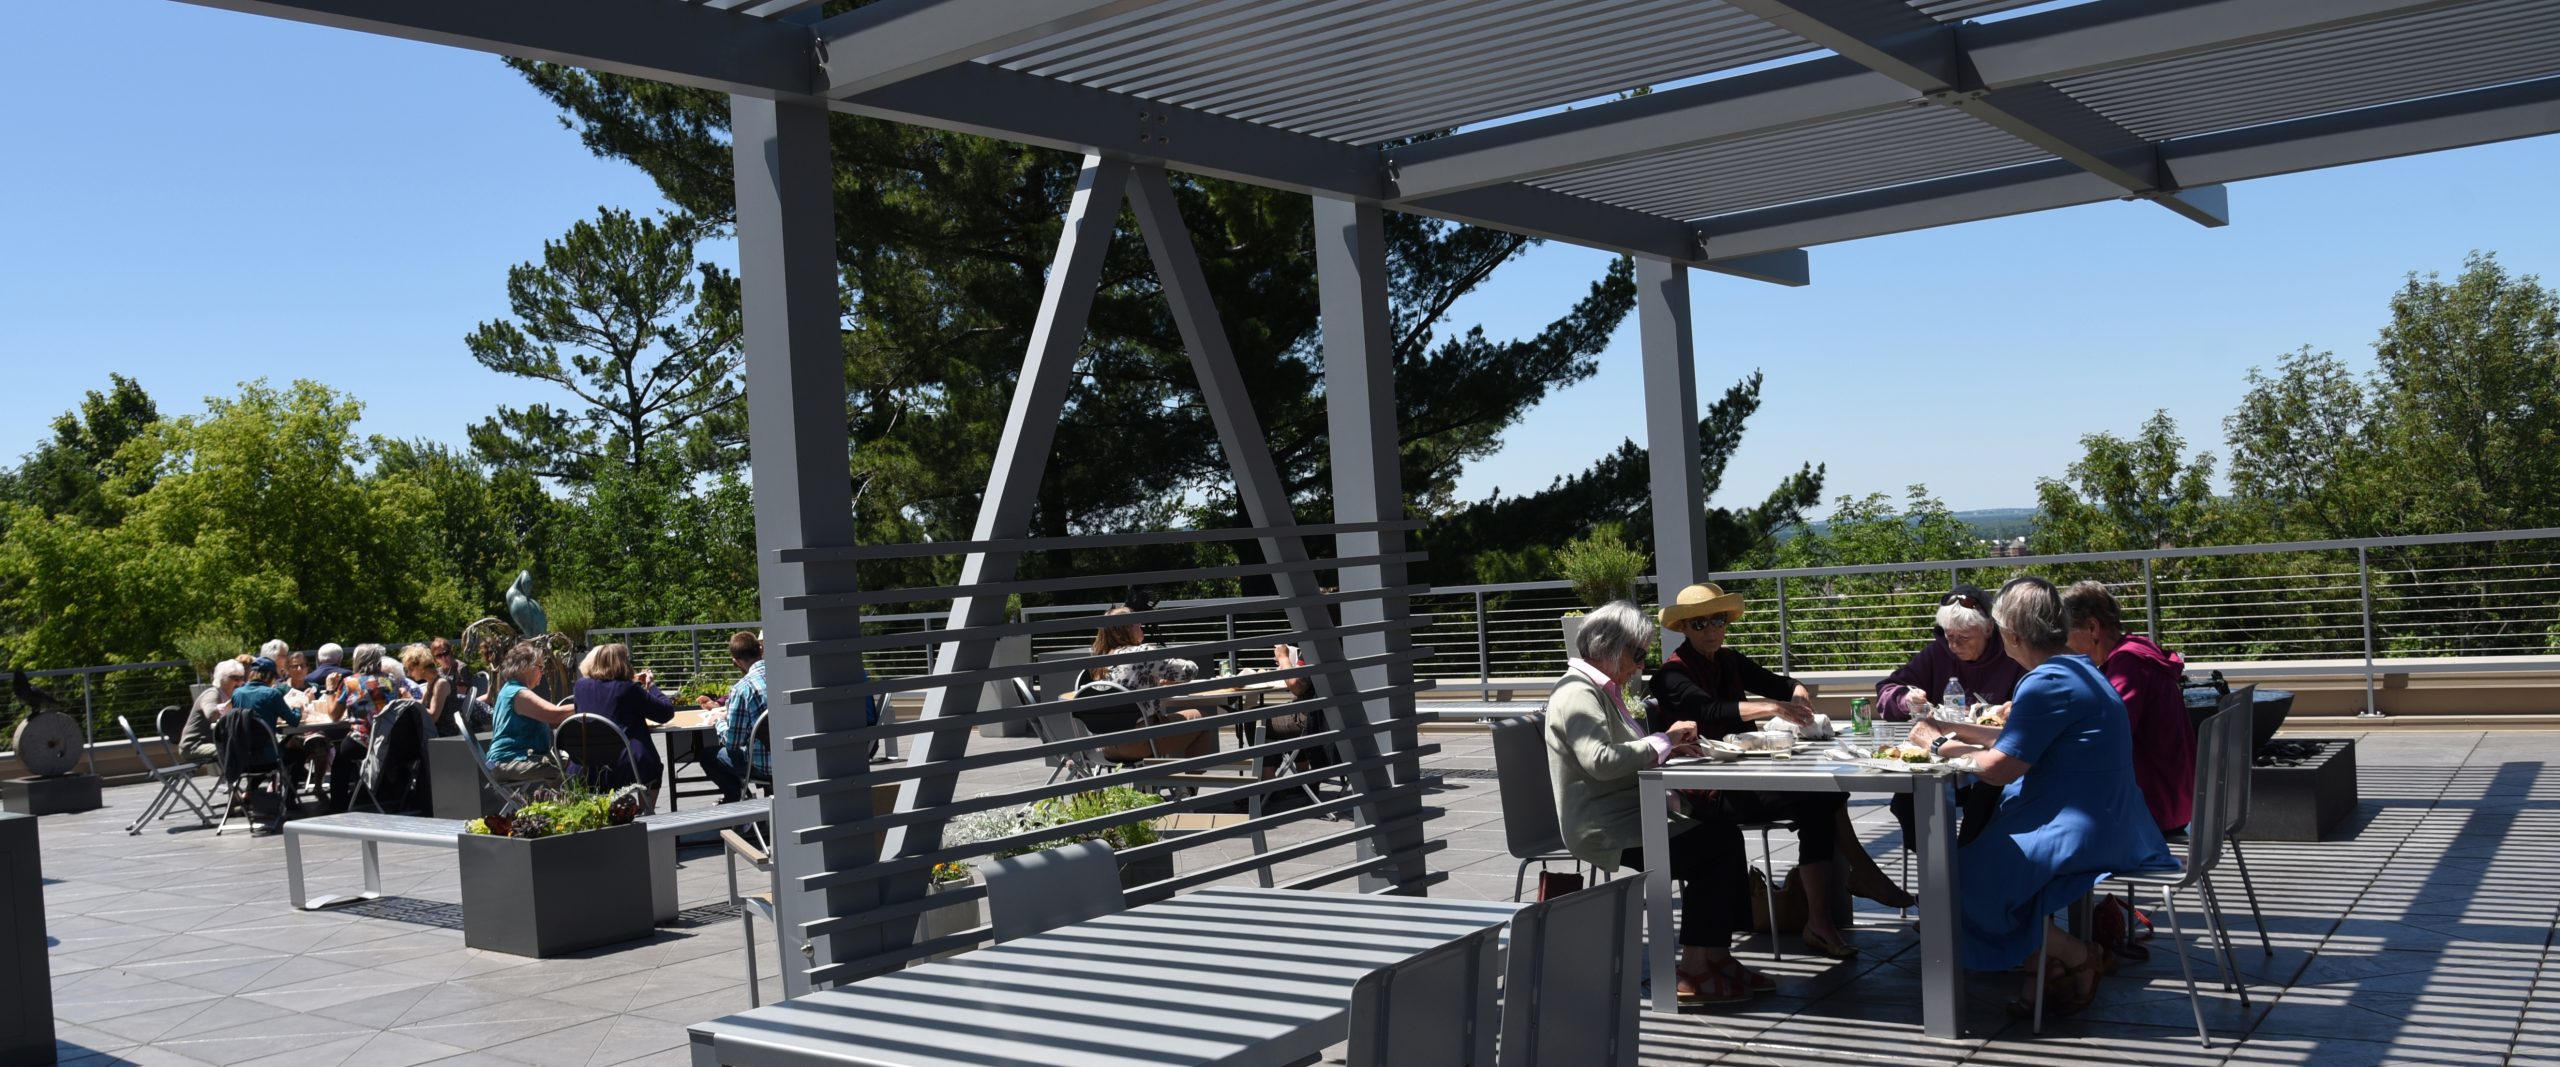 People enjoy lunch, seated at four tables in a rooftop sculpture garden on a sunny day with blue sky and trees in the background.